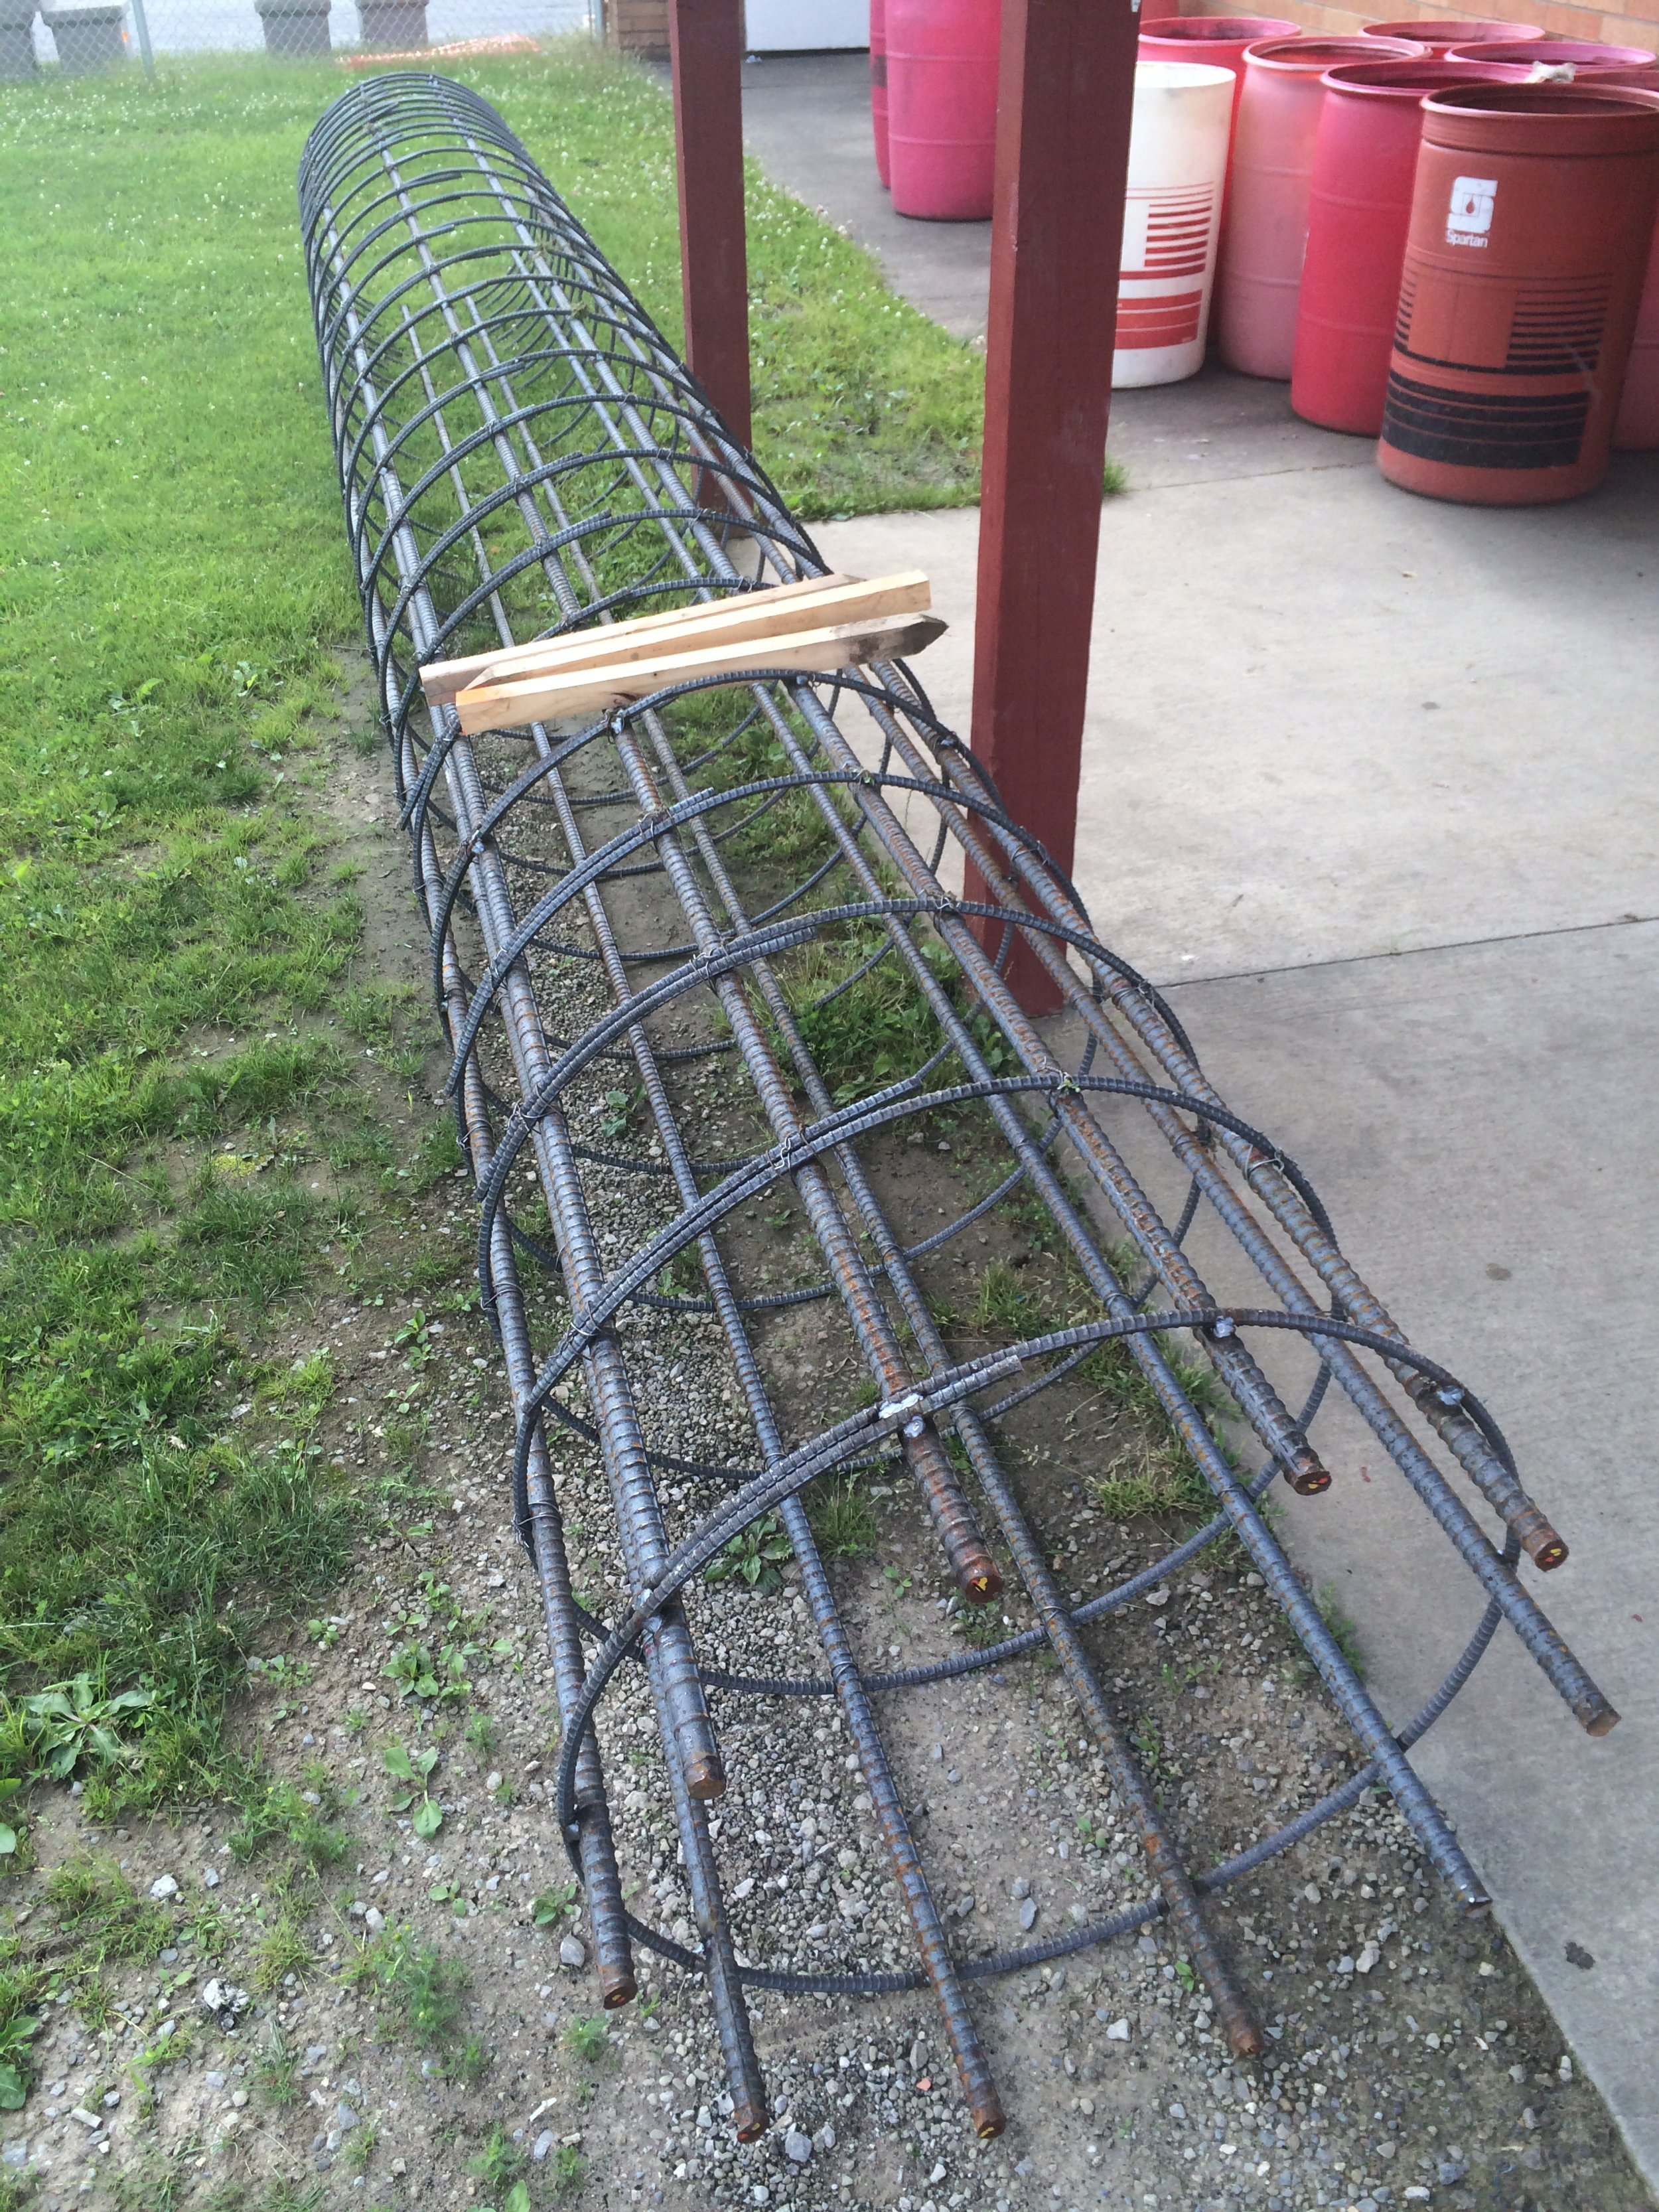 Rebar cage for concrete foundation for light poles about to be placed